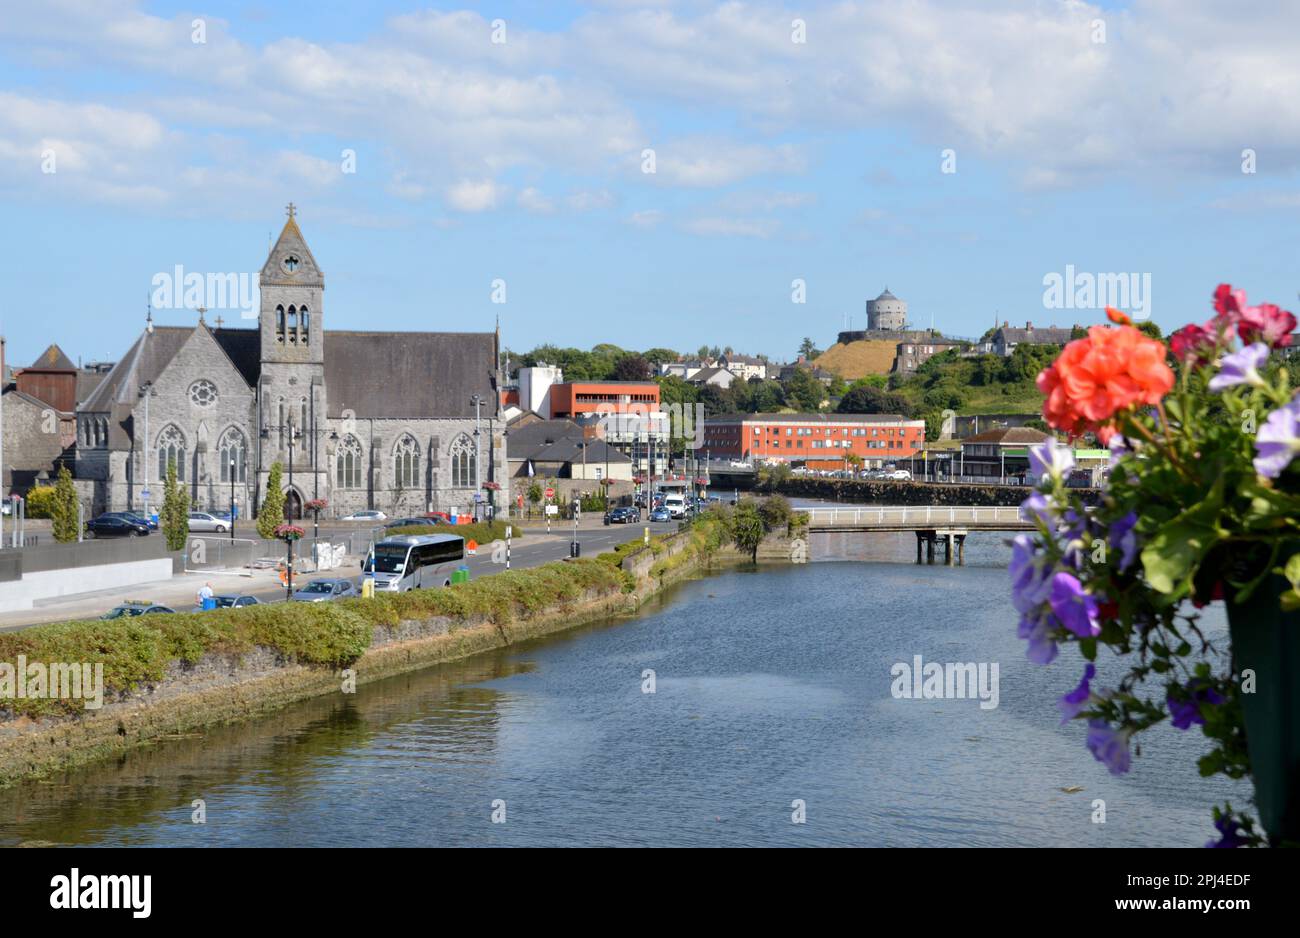 Ireland, Louth, Drogheda:  view from the roadbridge over the River Boyne, with St. Peter's Roman Catholic Church on the left and a Martello tower on t Stock Photo